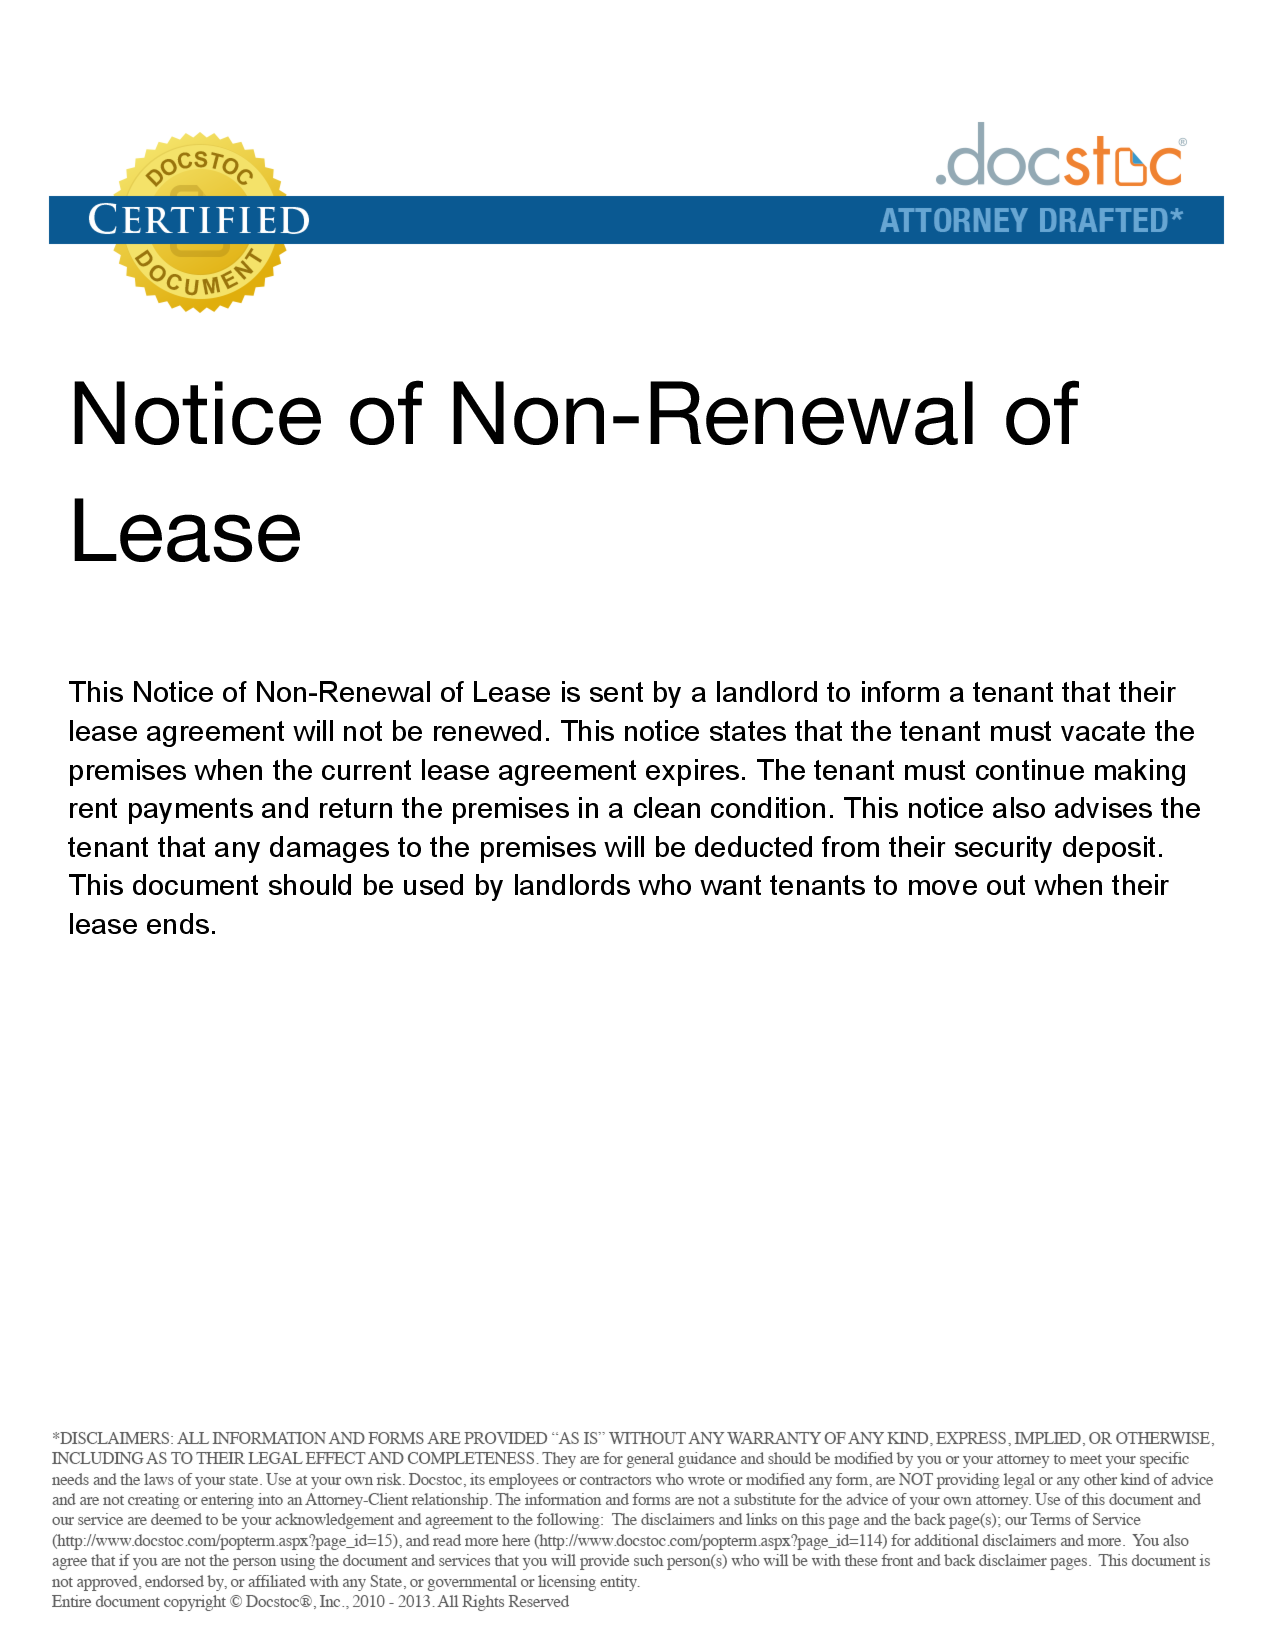 nonrenewal-of-lease-letter-free-printable-documents